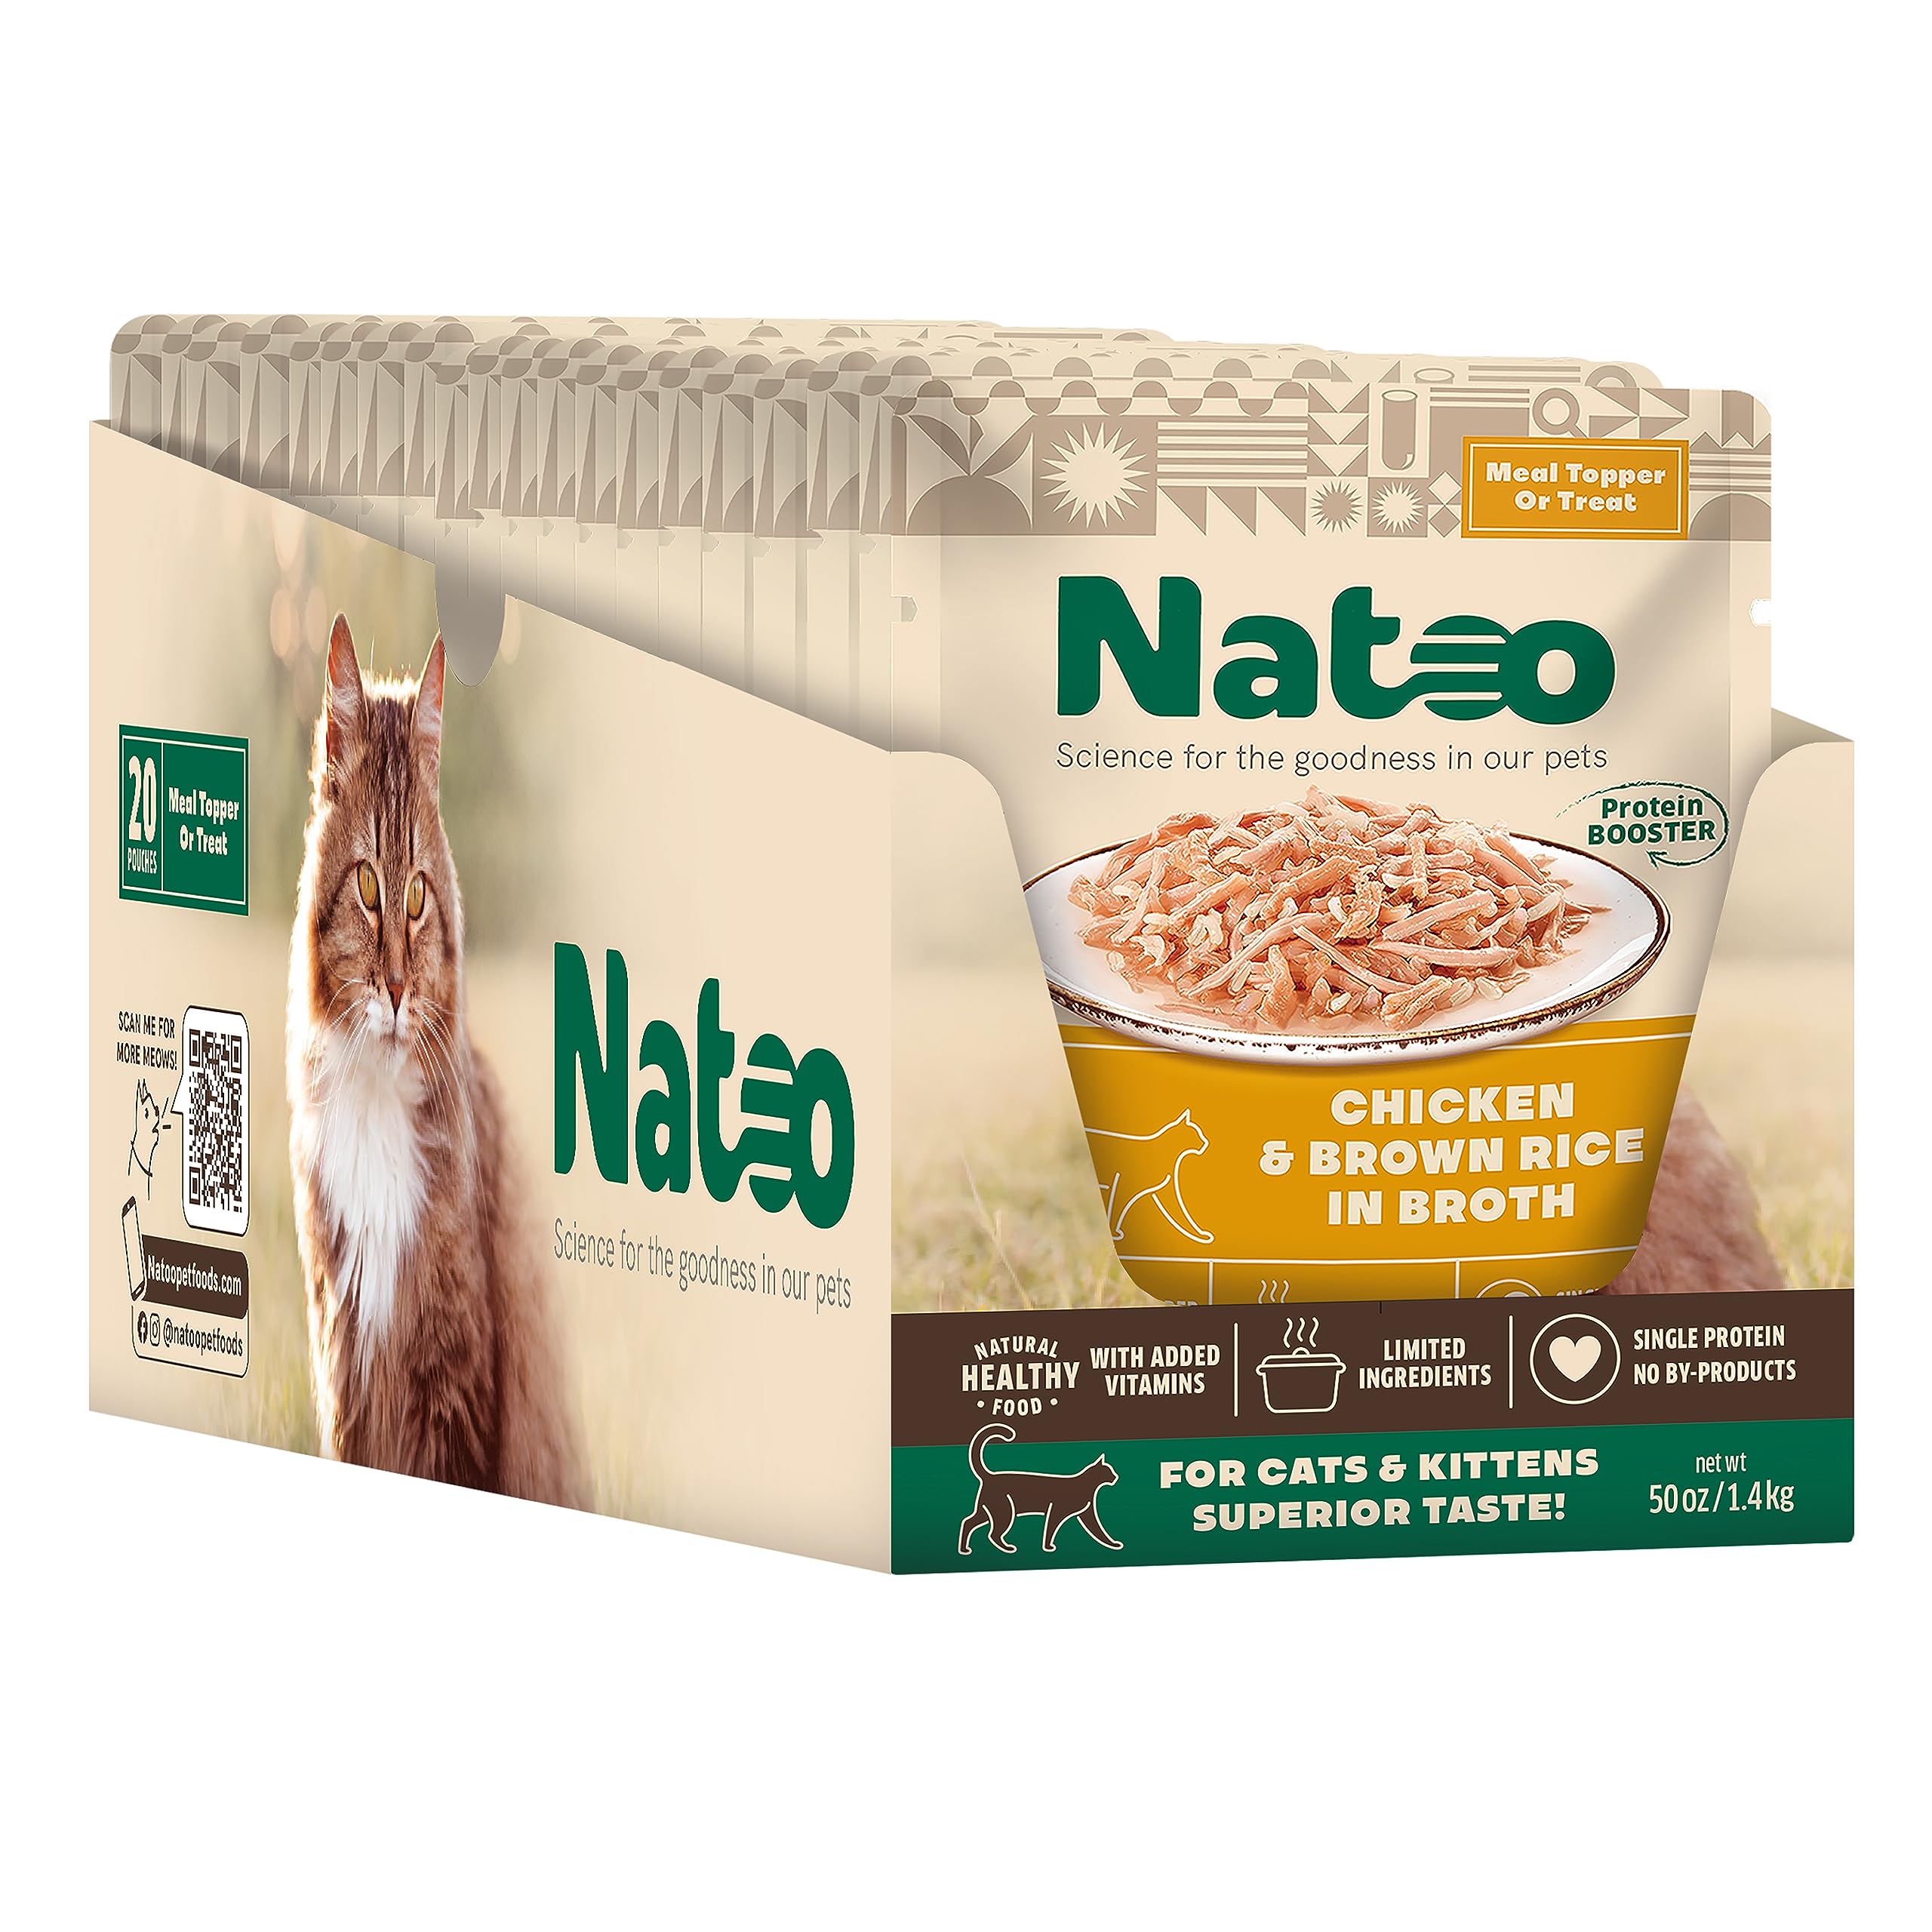 Natoo Limited Ingredient Diet Chicken and Brown Rice Cat Food Toppers - 2.4 Oz - Case of 20  